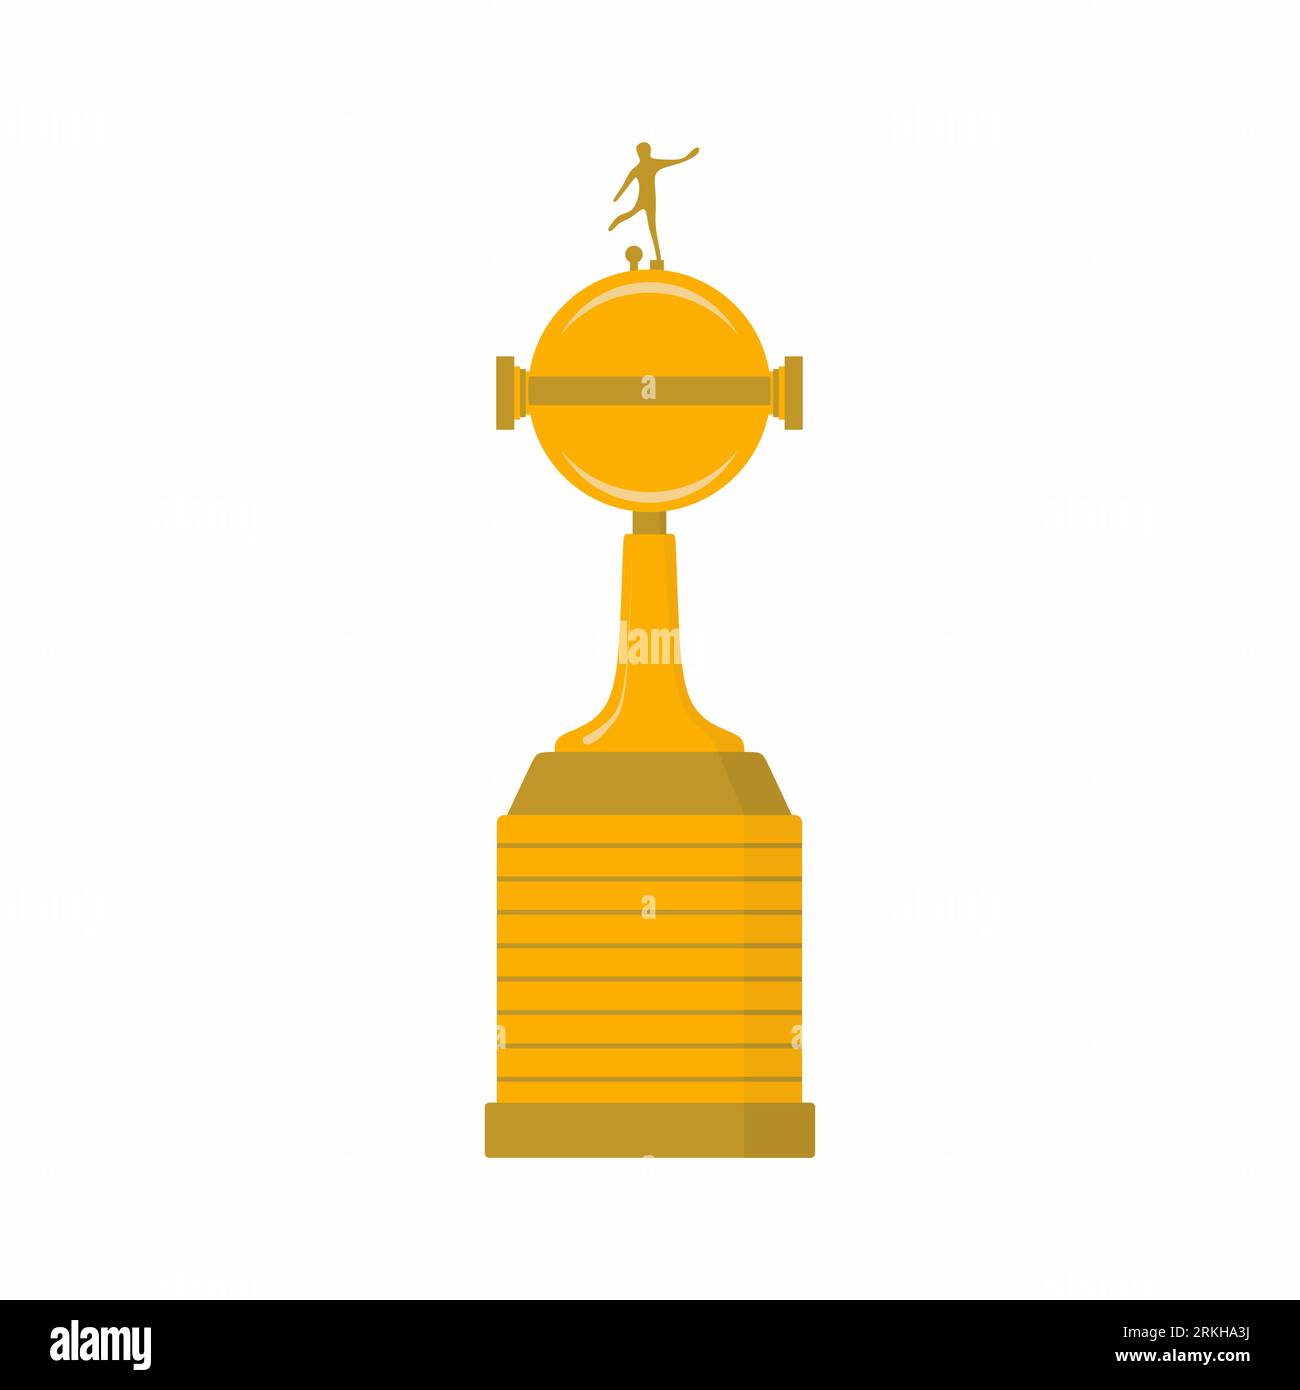 The Copa Libertadores trophy flat icon cartoon style isolated on white background. Concept of prize, leadership, winning and success. Golden cup winne Stock Vector